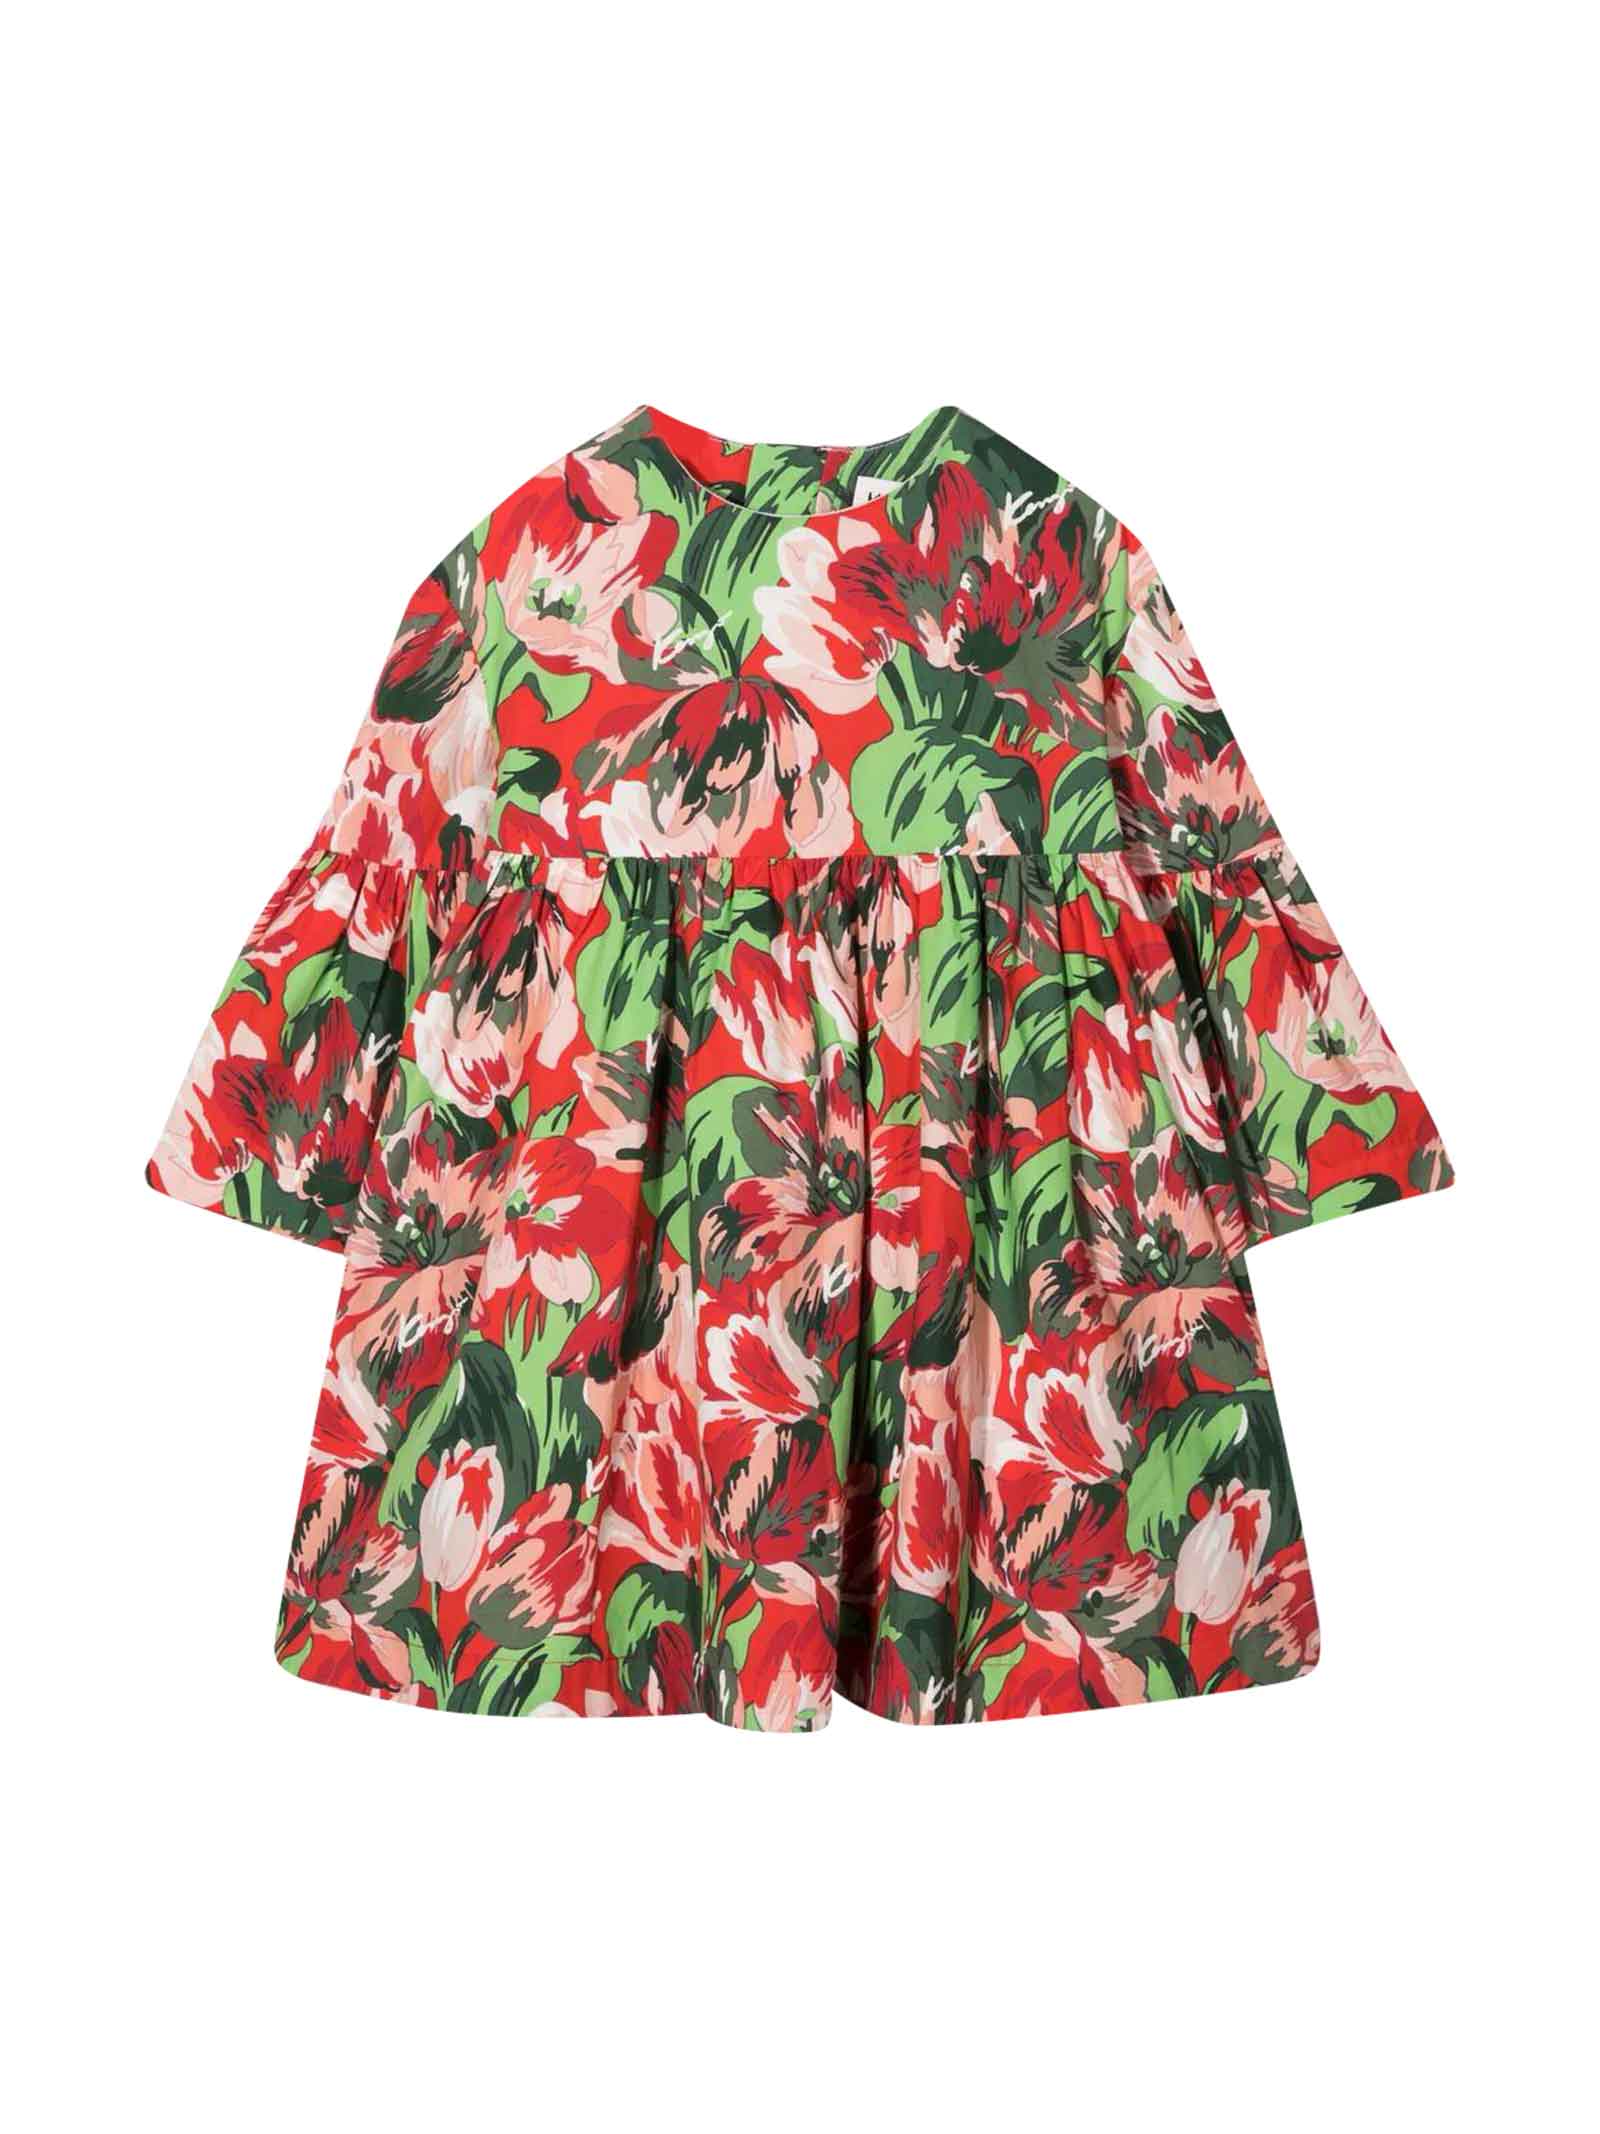 Kenzo Kids Red / Green / Black Midi Dress Girl With All-over Floral Print Of Medium Length, Round Neckline, Bell Sleeves, Pleated Skirt, Zip Closure On The Back